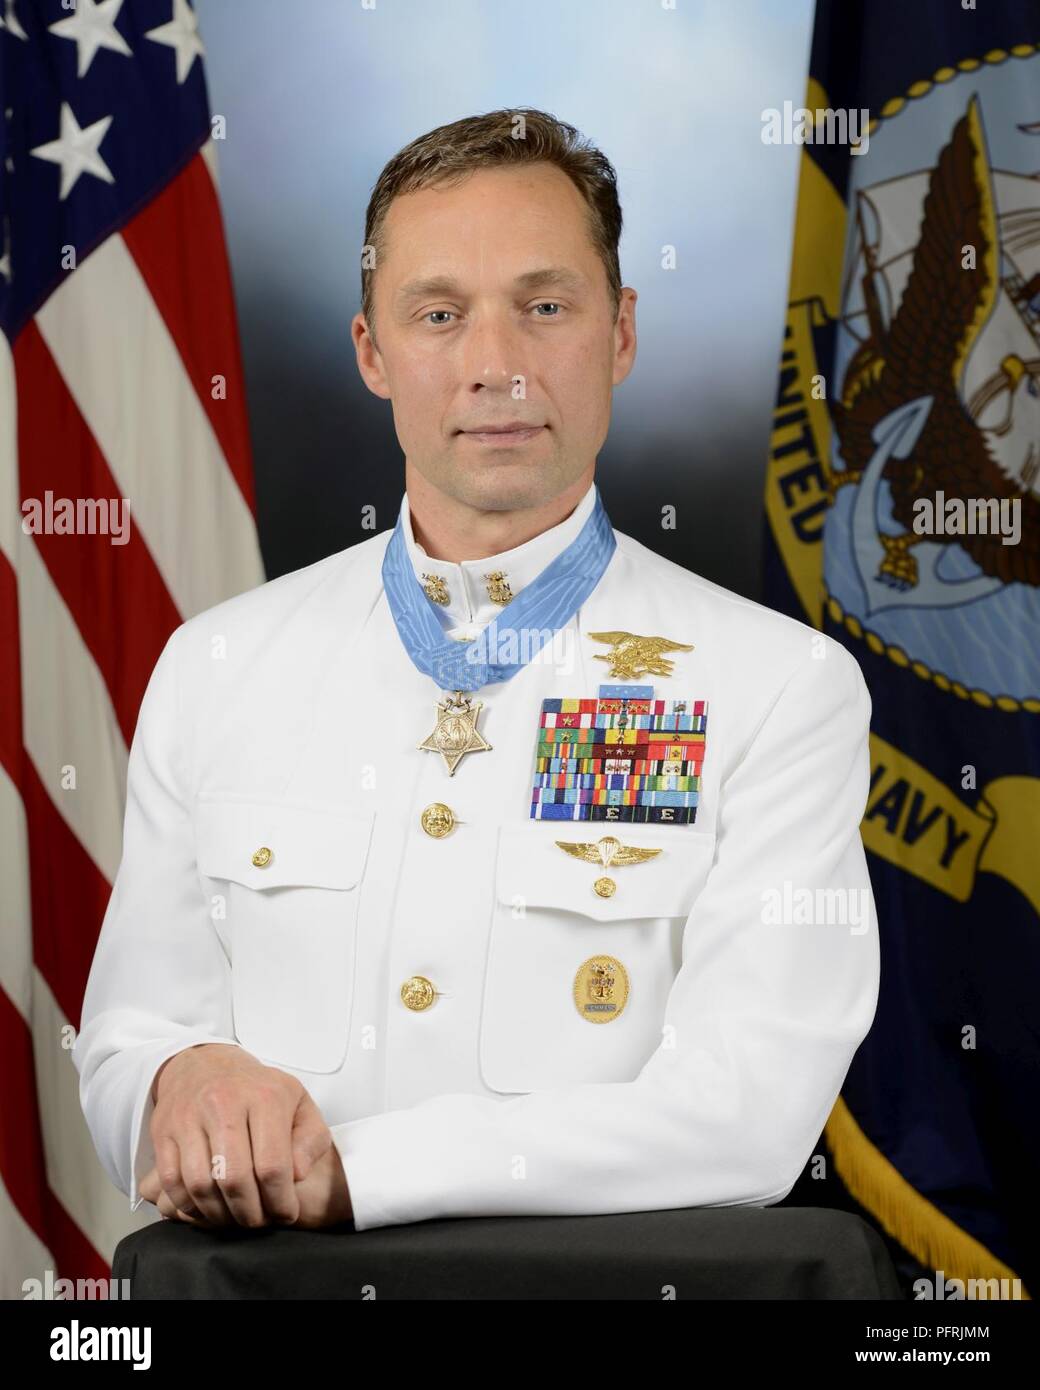 180525-A-SS368-006 WASHINGTON (May 25, 2018) An official portrait of retired Master Chief Special Warfare Operator (SEAL) Britt K. Slabinski taken May 25, 2018 at the Pentagon. President Donald J. Trump awarded the Medal of Honor to Slabinski during a White House ceremony May 24, 2018 for his heroic actions during the Battle of Takur Ghar in March 2002 while serving in Afghanistan. Slabinski is being recognized for his actions while leading a team under heavy effective enemy fire in an attempt to rescue SEAL teammate Petty Officer 1st Class Neil Roberts during Operation Anaconda in 2002. The M Stock Photo